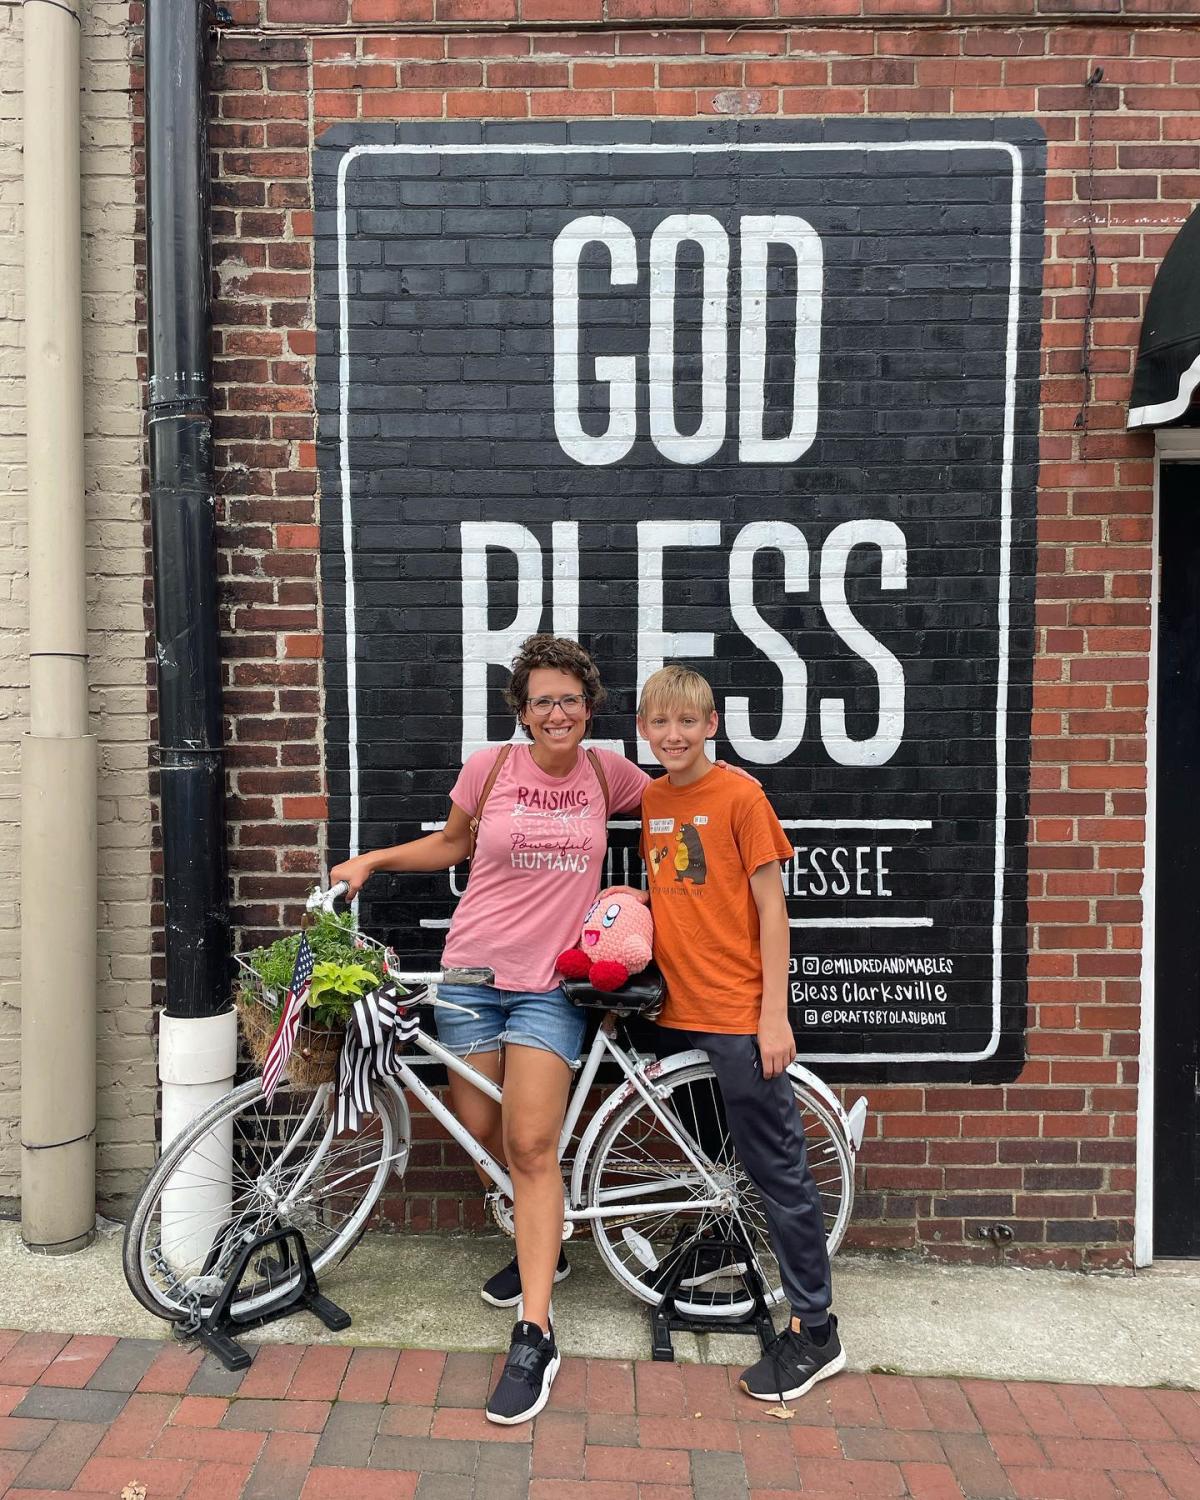 woman and young boy pose on a bicycle in front of a mural